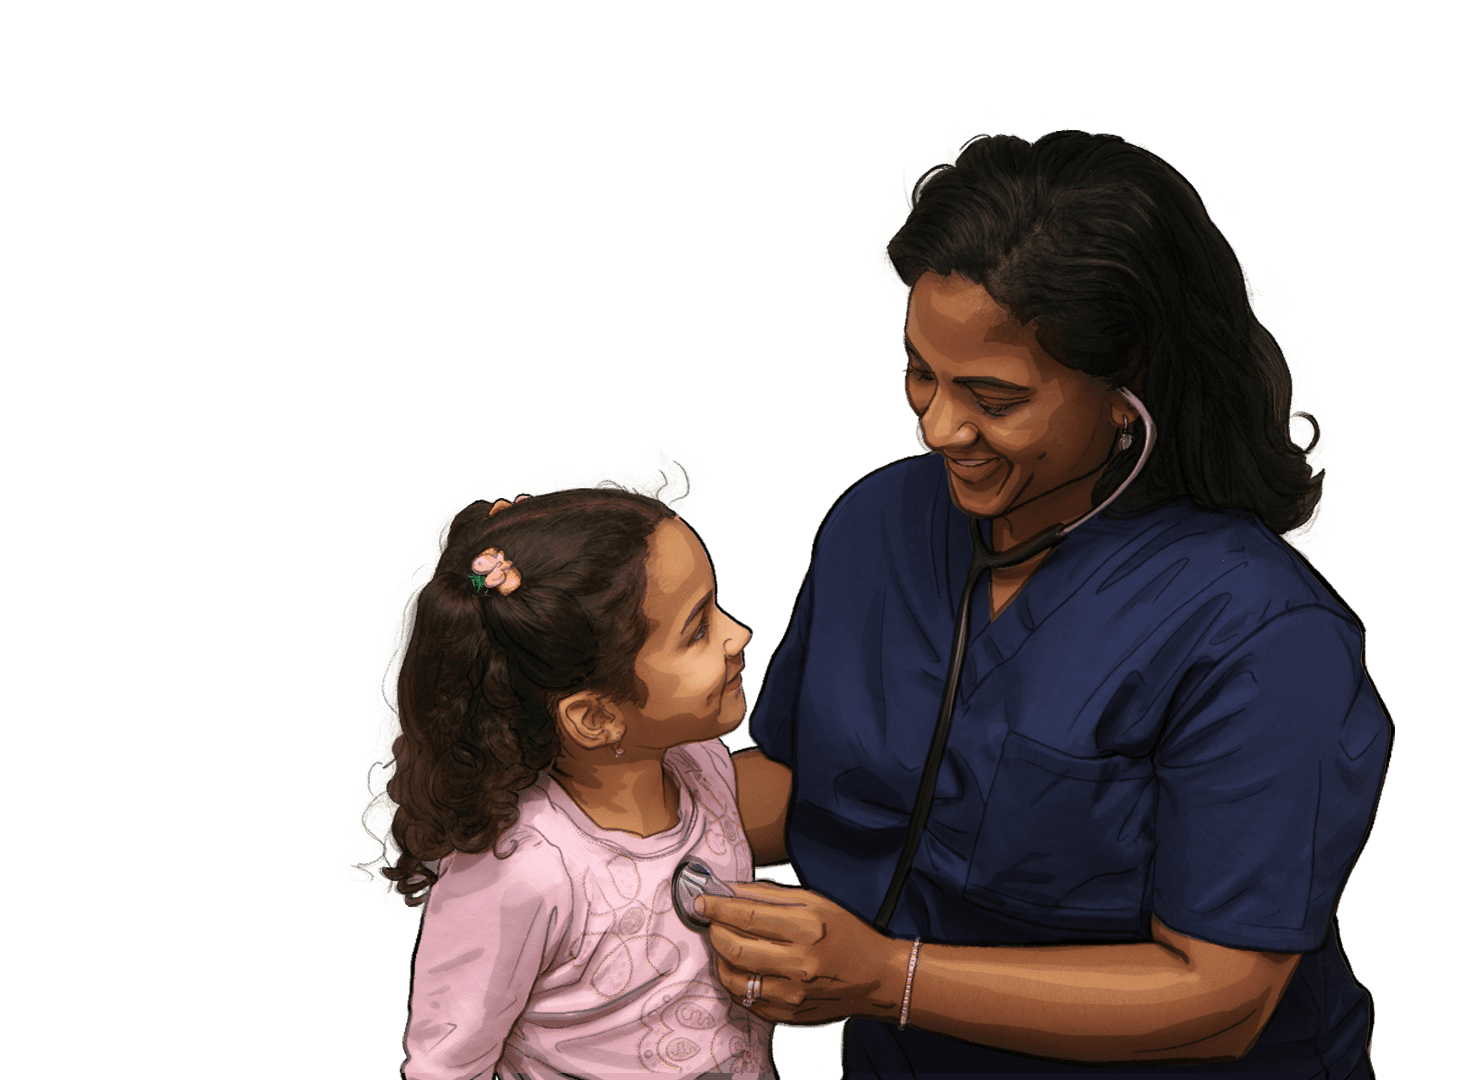 A sketch of a Medical Assistant listening to a child&#039;s heartbeat through a stethoscope, which is becoming more photorealistic.